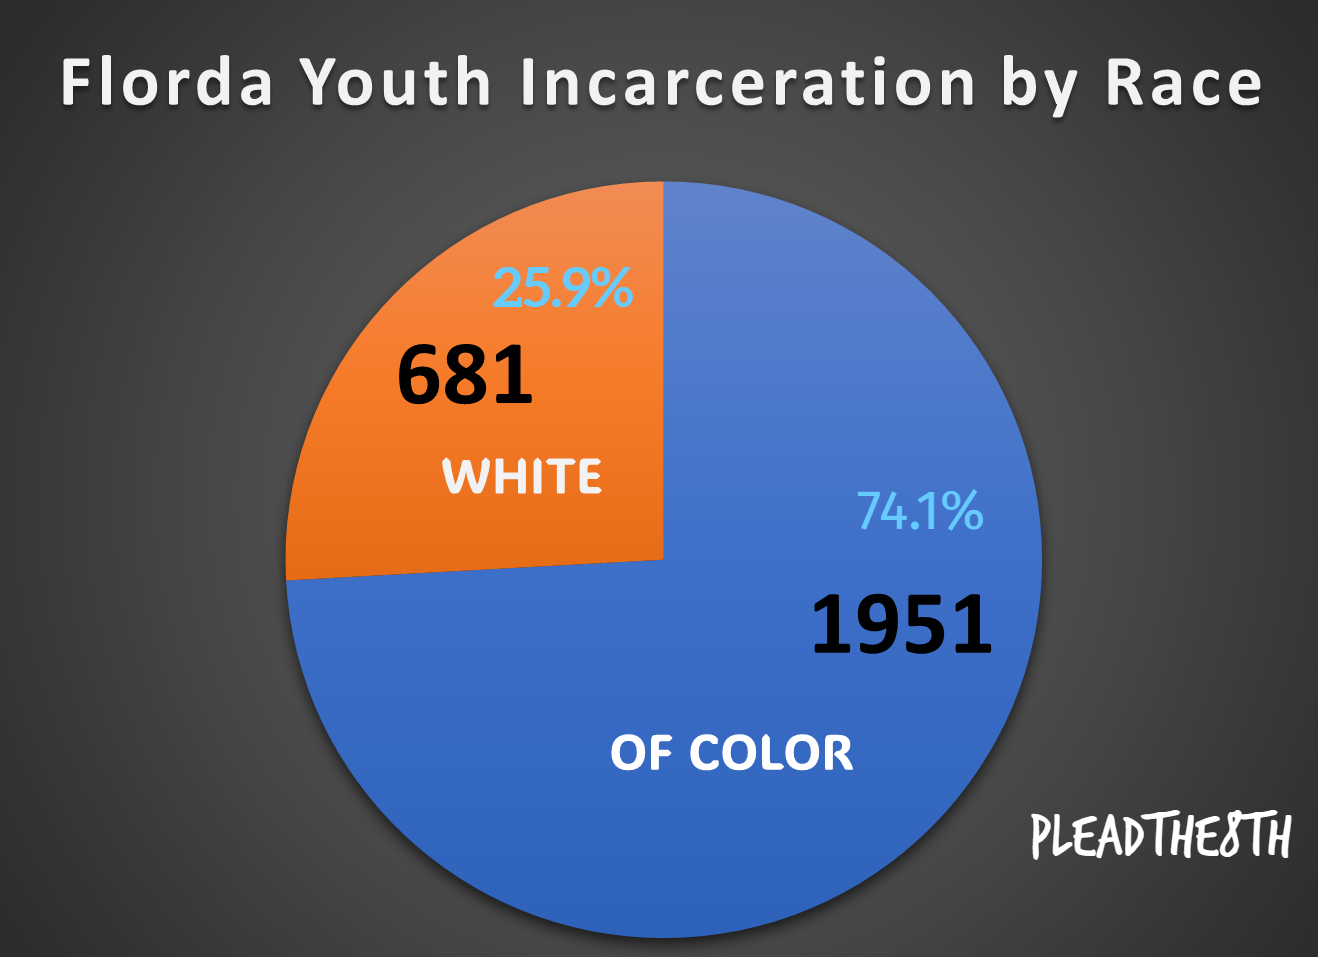 Florida youth incarceration by race